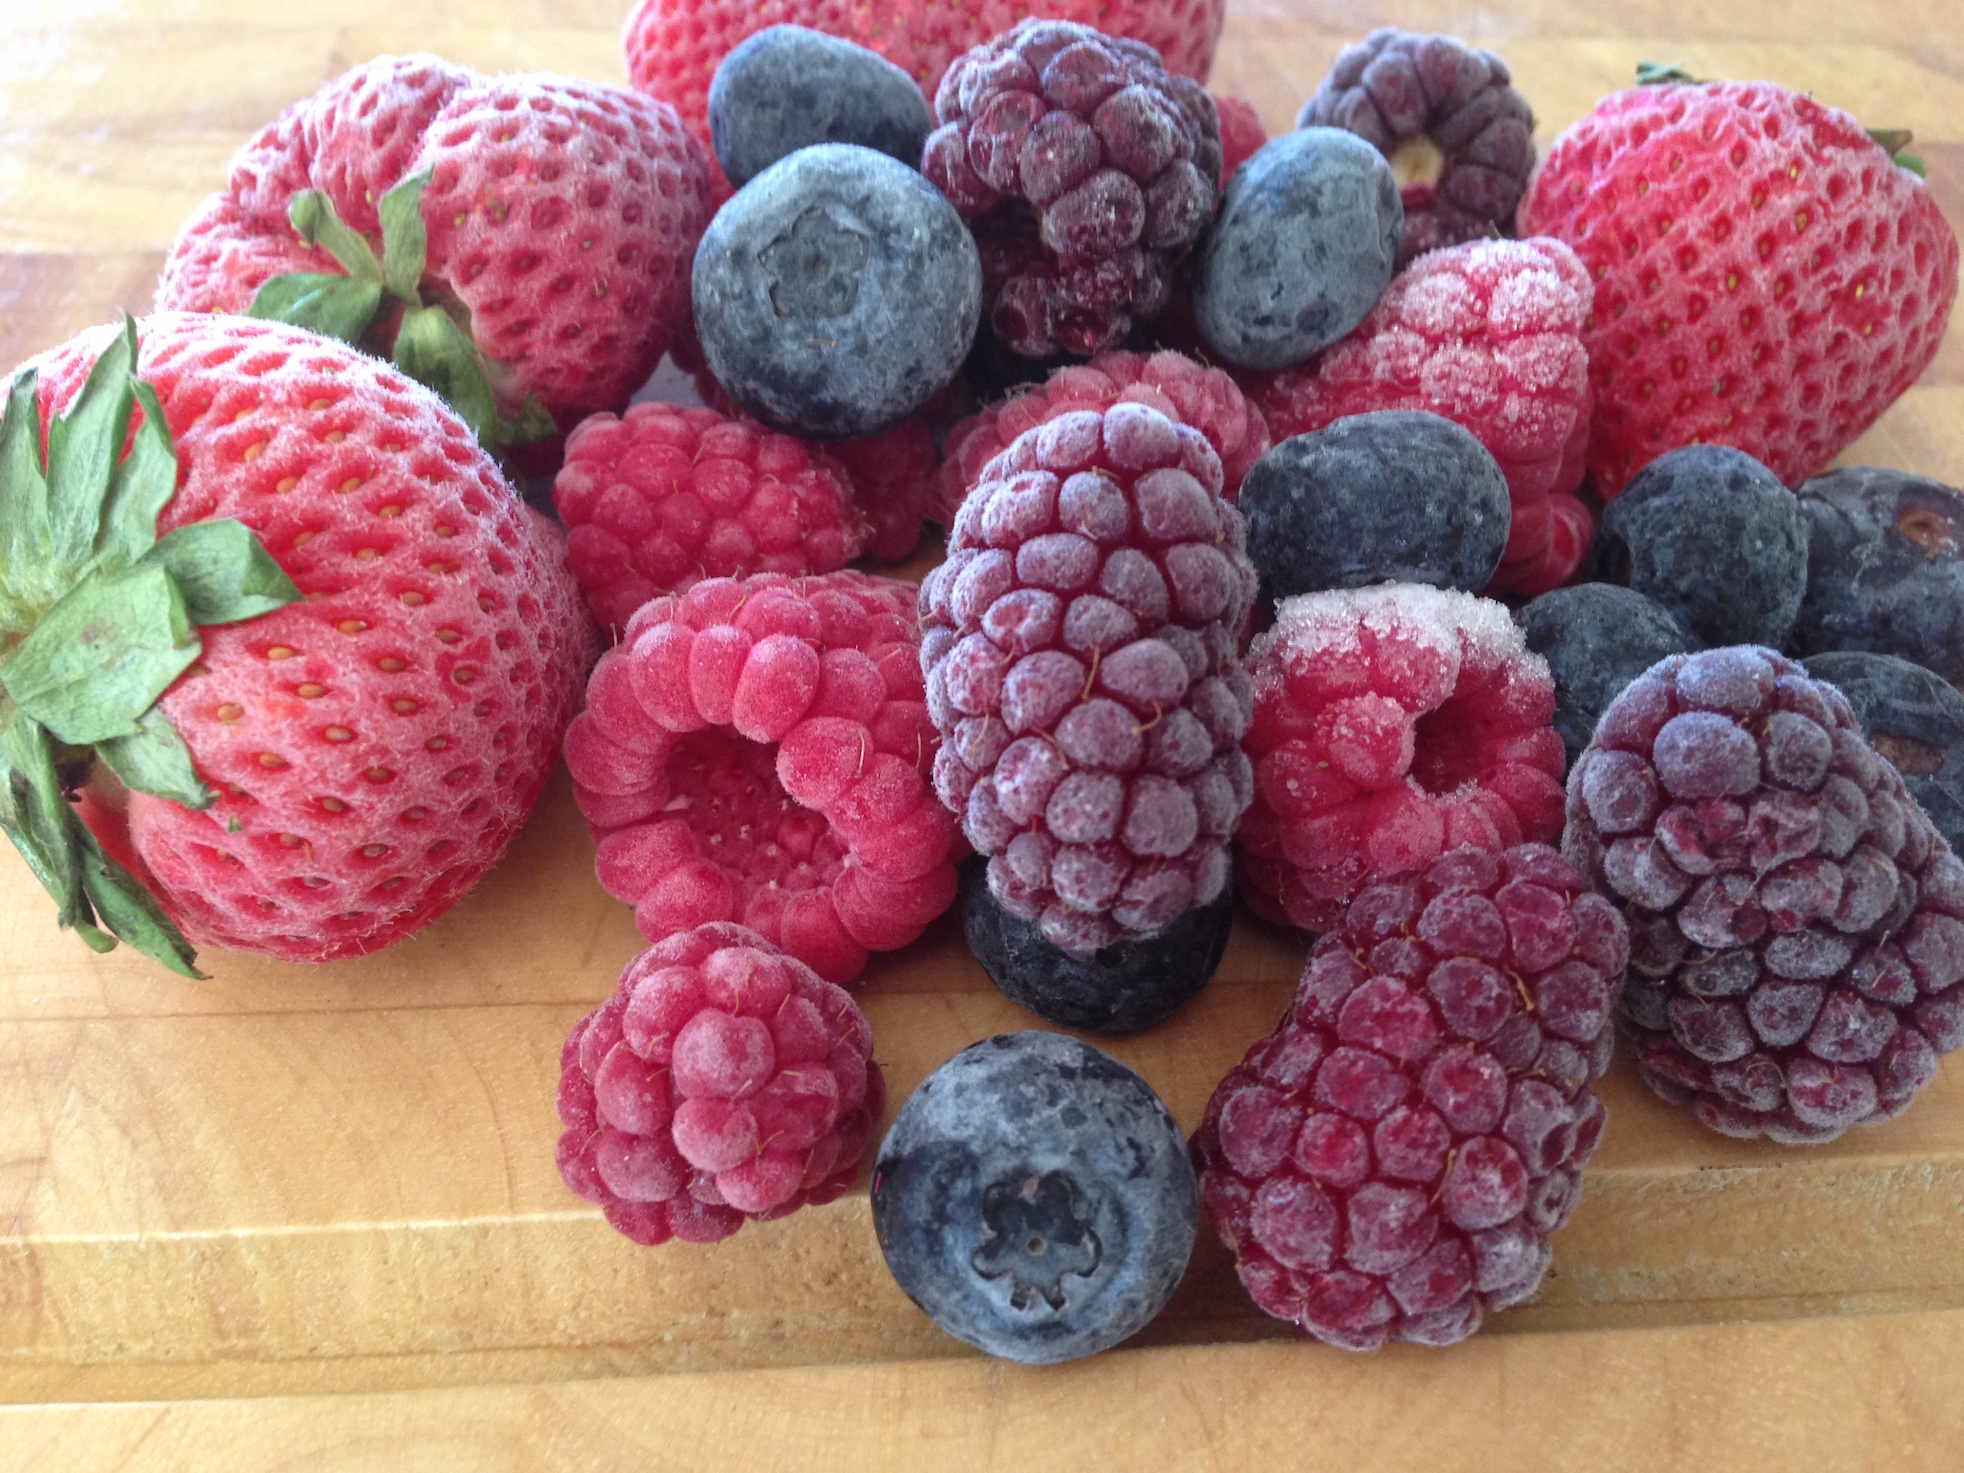 Closeup of mixed berries on a chopping board